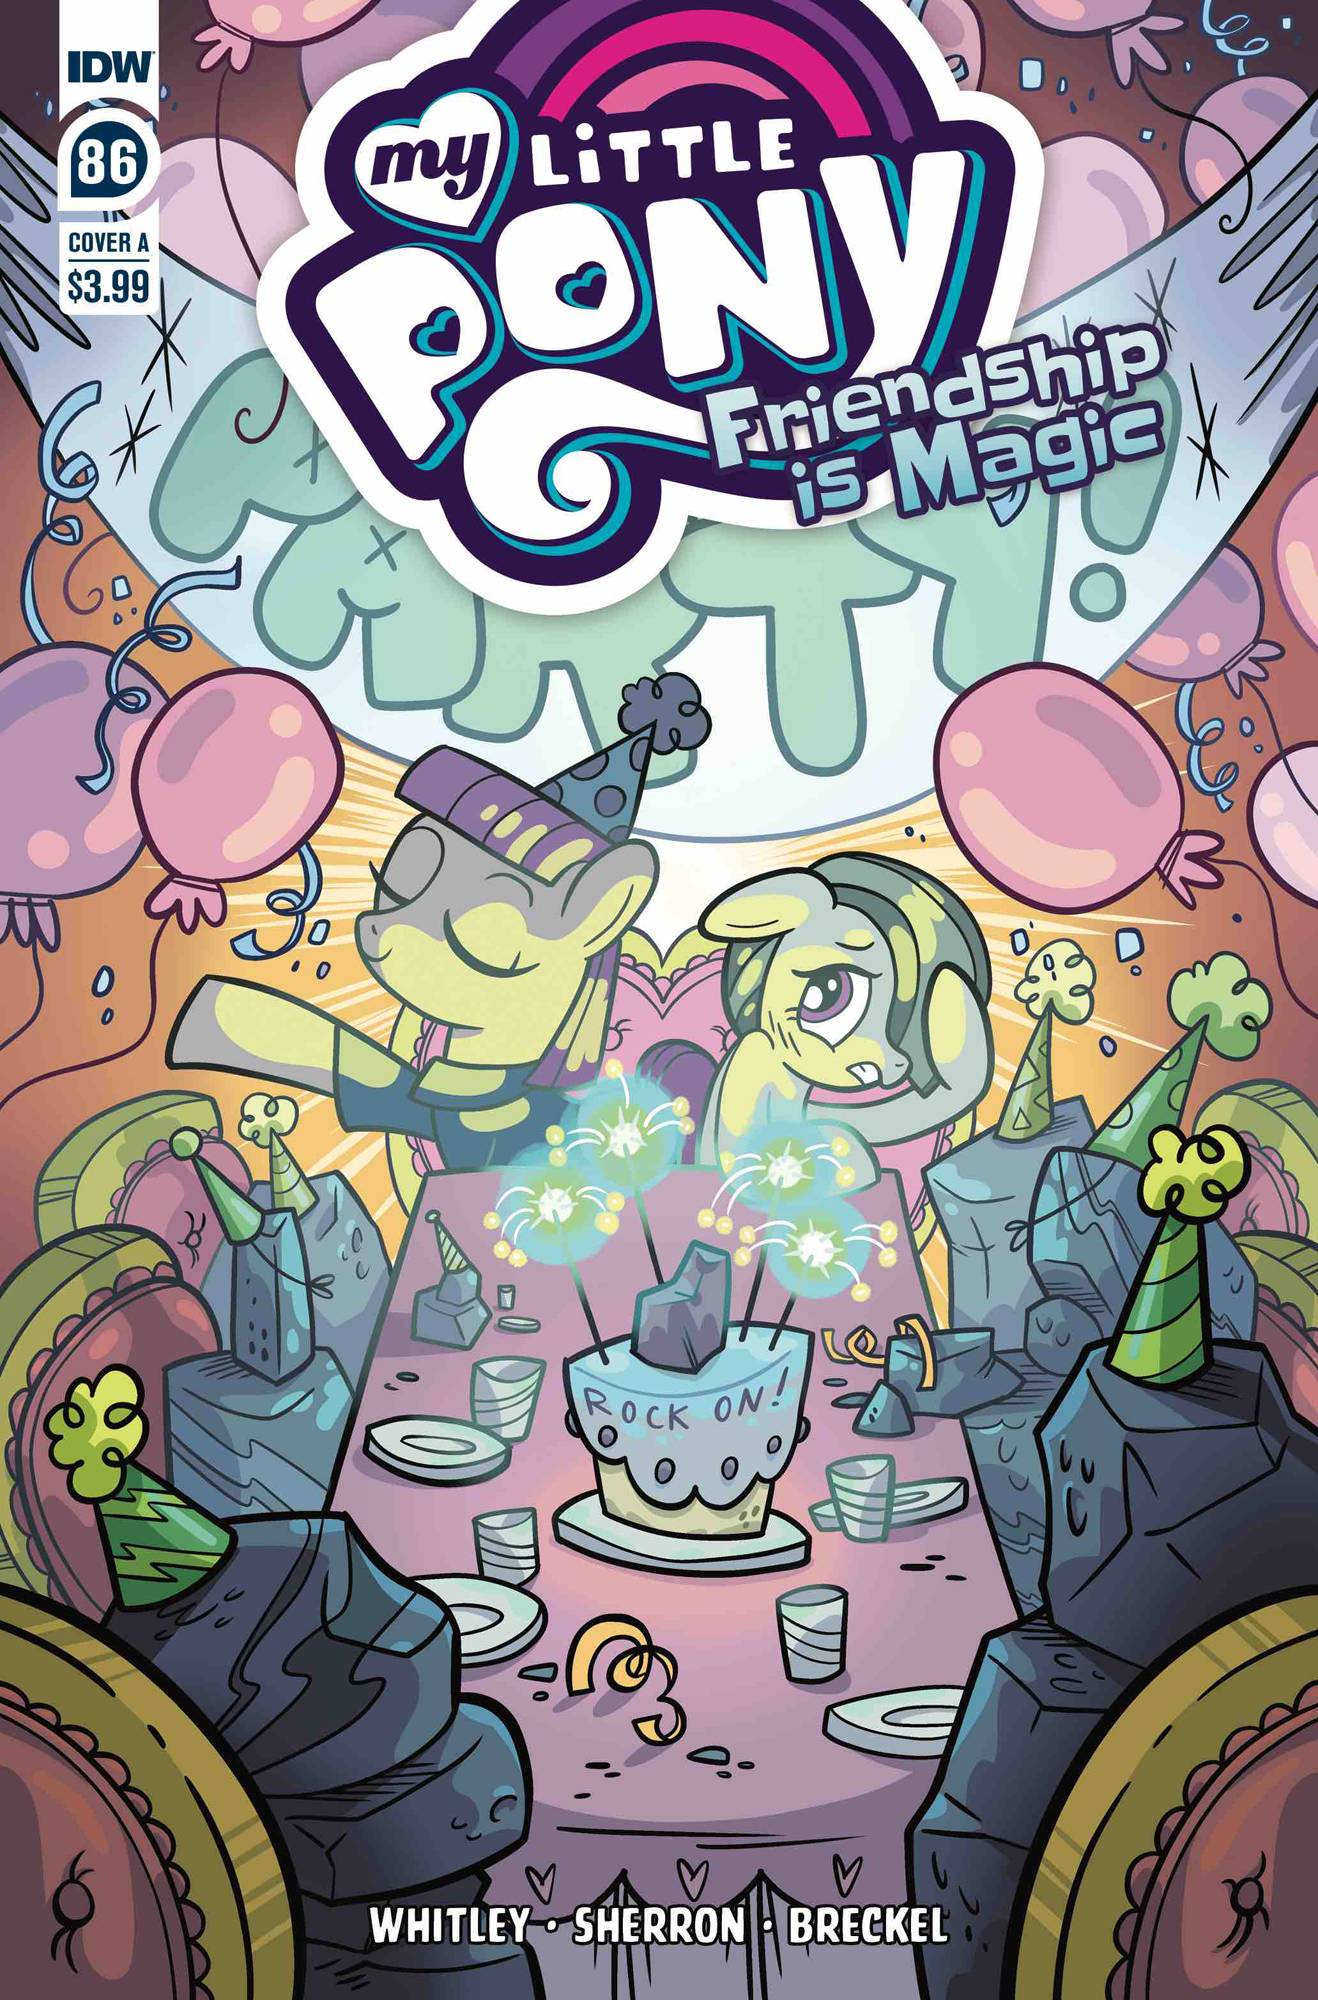 My Little Pony Friendship Is Magic #86 Cover A Sherron